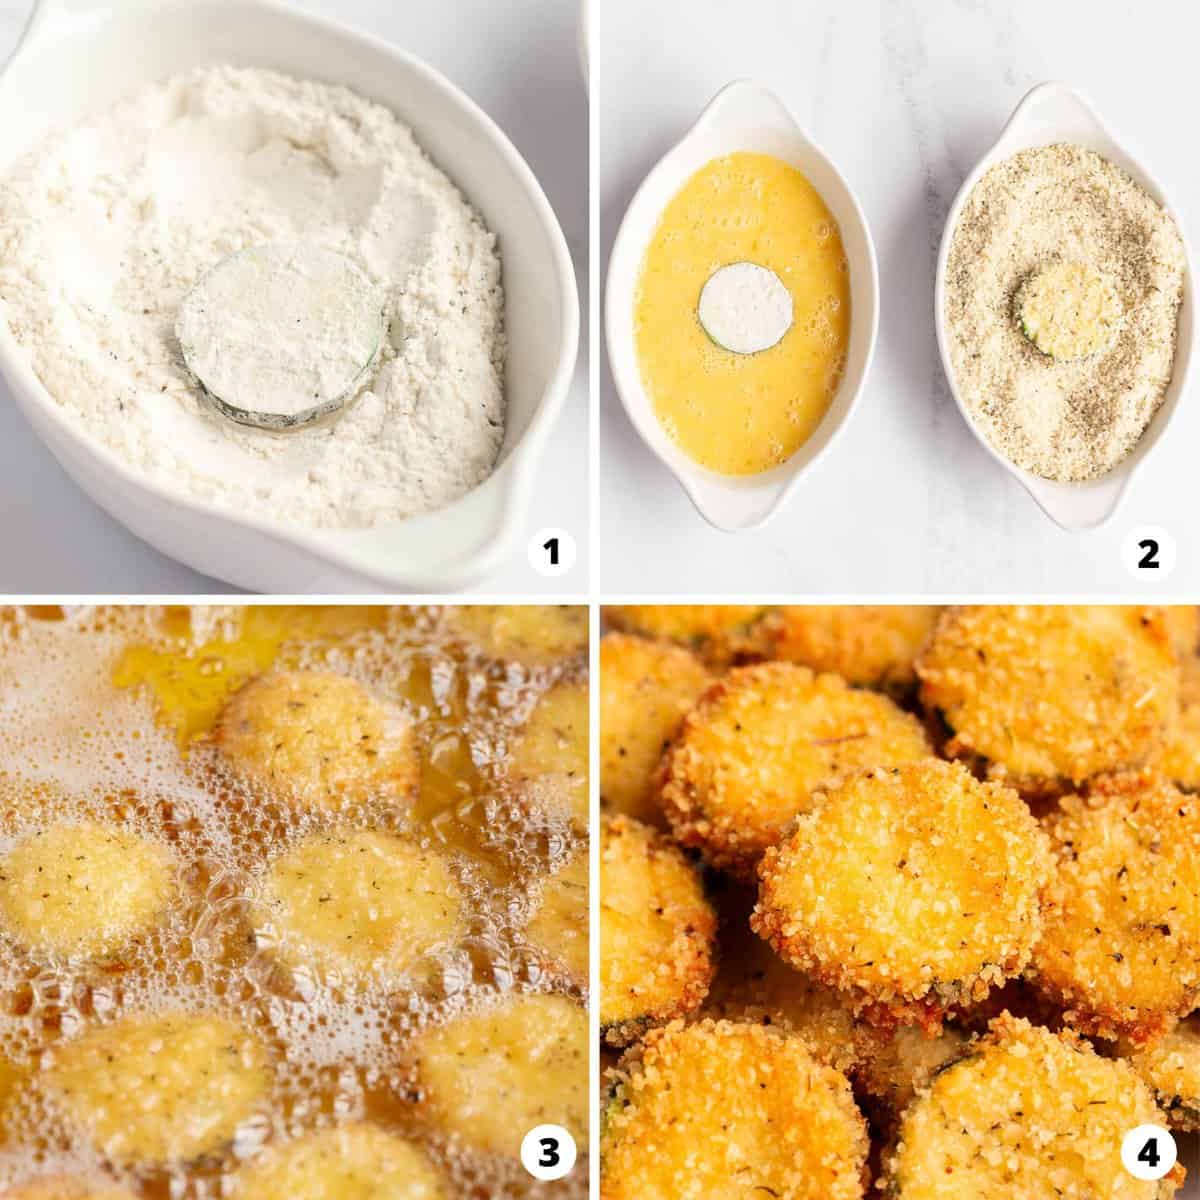 Showing how to make fried zucchini in a 4 step collage.